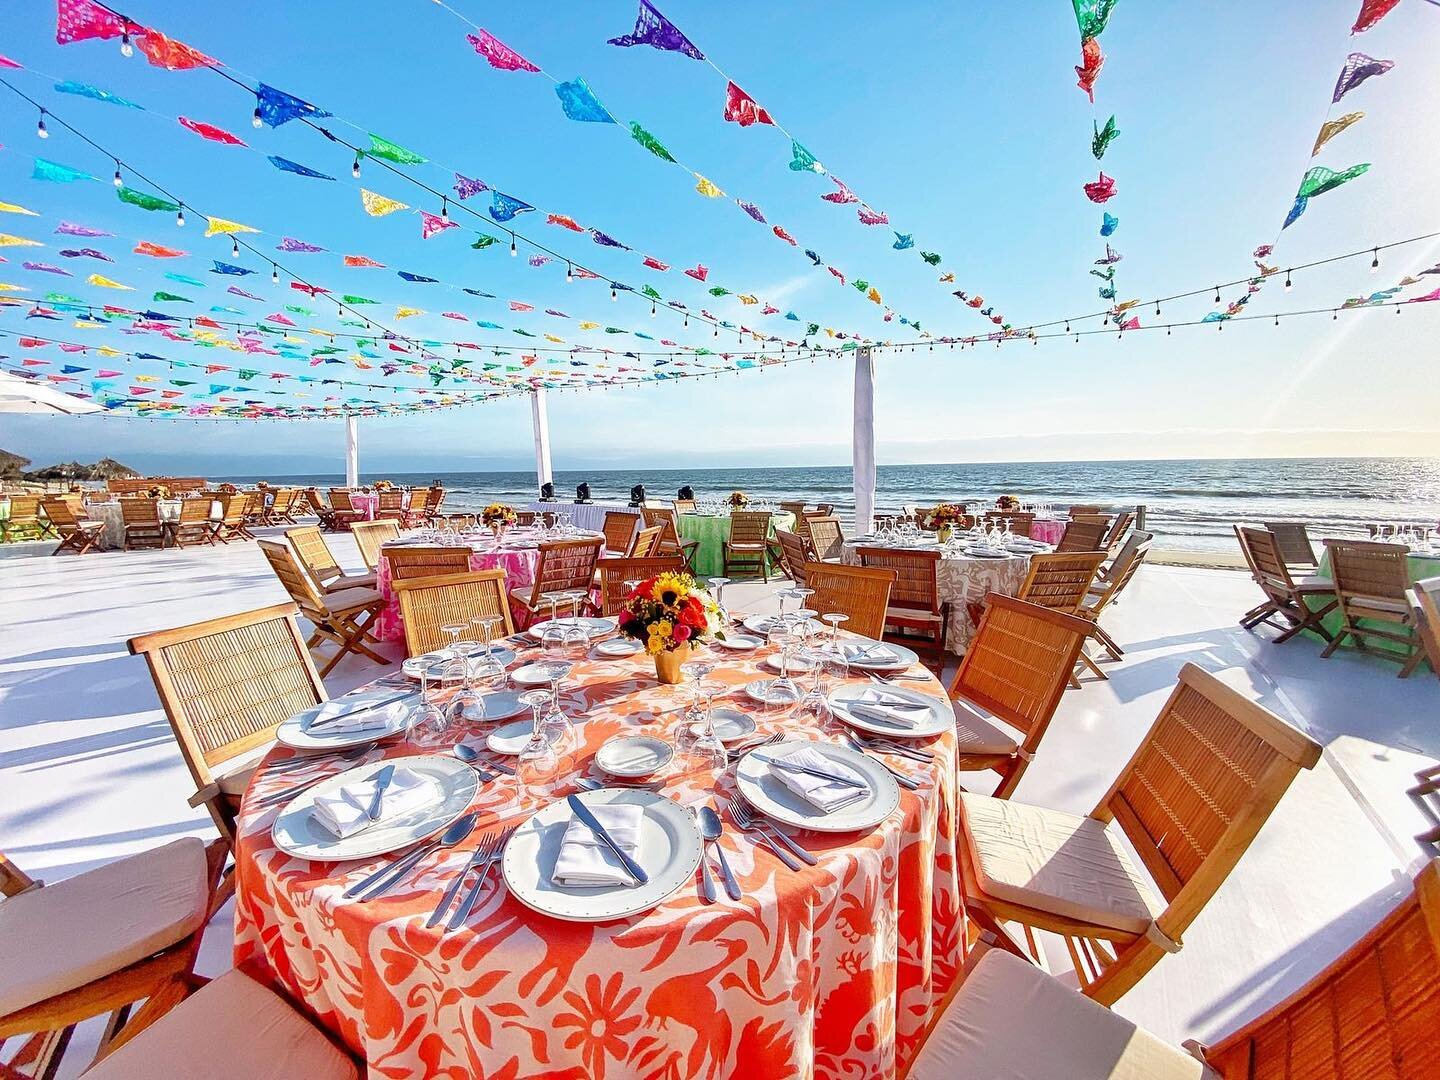 Happy Cinco de Mayo! 🇲🇽 Love this Mexican Fiesta decor from our partners @celtrevaudiovisual at Grand Velas Riviera Nayarit for our @captiv8 Offsite!

#thevermilioncompany #cincodemayo #mexicanfiesta #destinationeventplanner #mexicoeventplanner #co